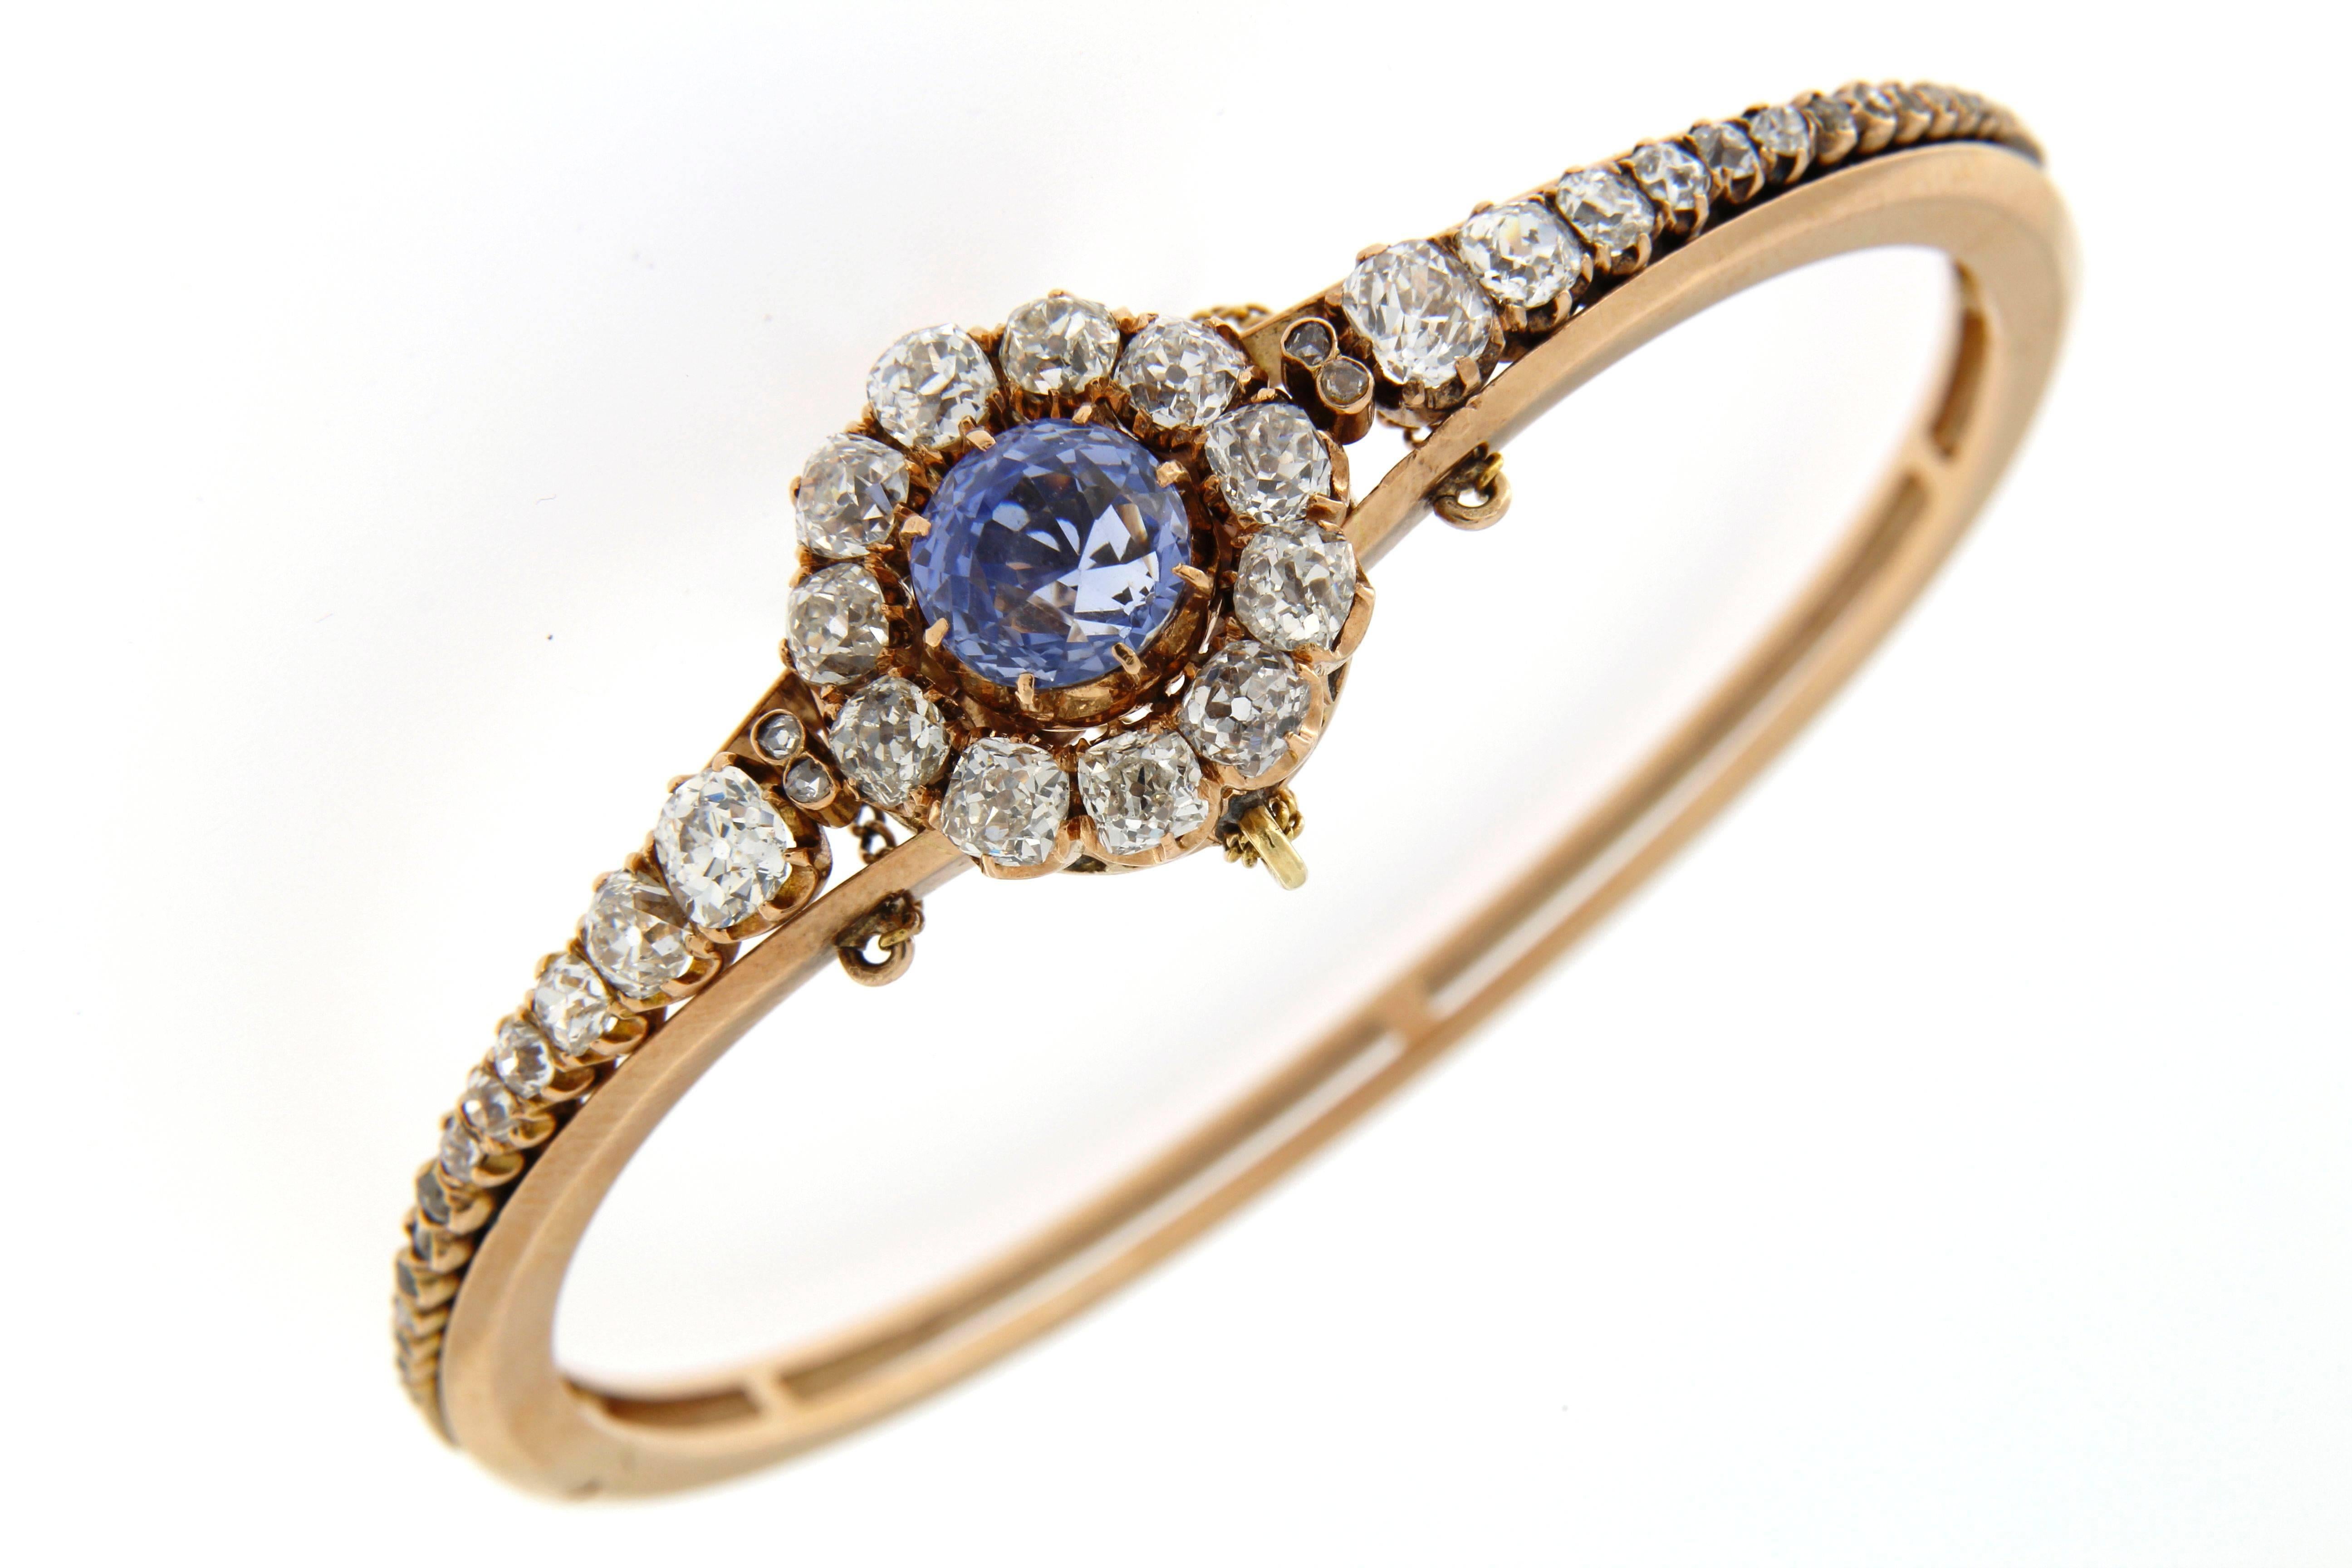 Rose gold 14 kt, for this superb Victorian age bangle bracelet, original piece, designed to be used as a bangle or, unsetting the central element as a pendant.
Ntural Sri Lanka sapphire , round cut, ct. 3.00 circa
antique cut diamonds , total